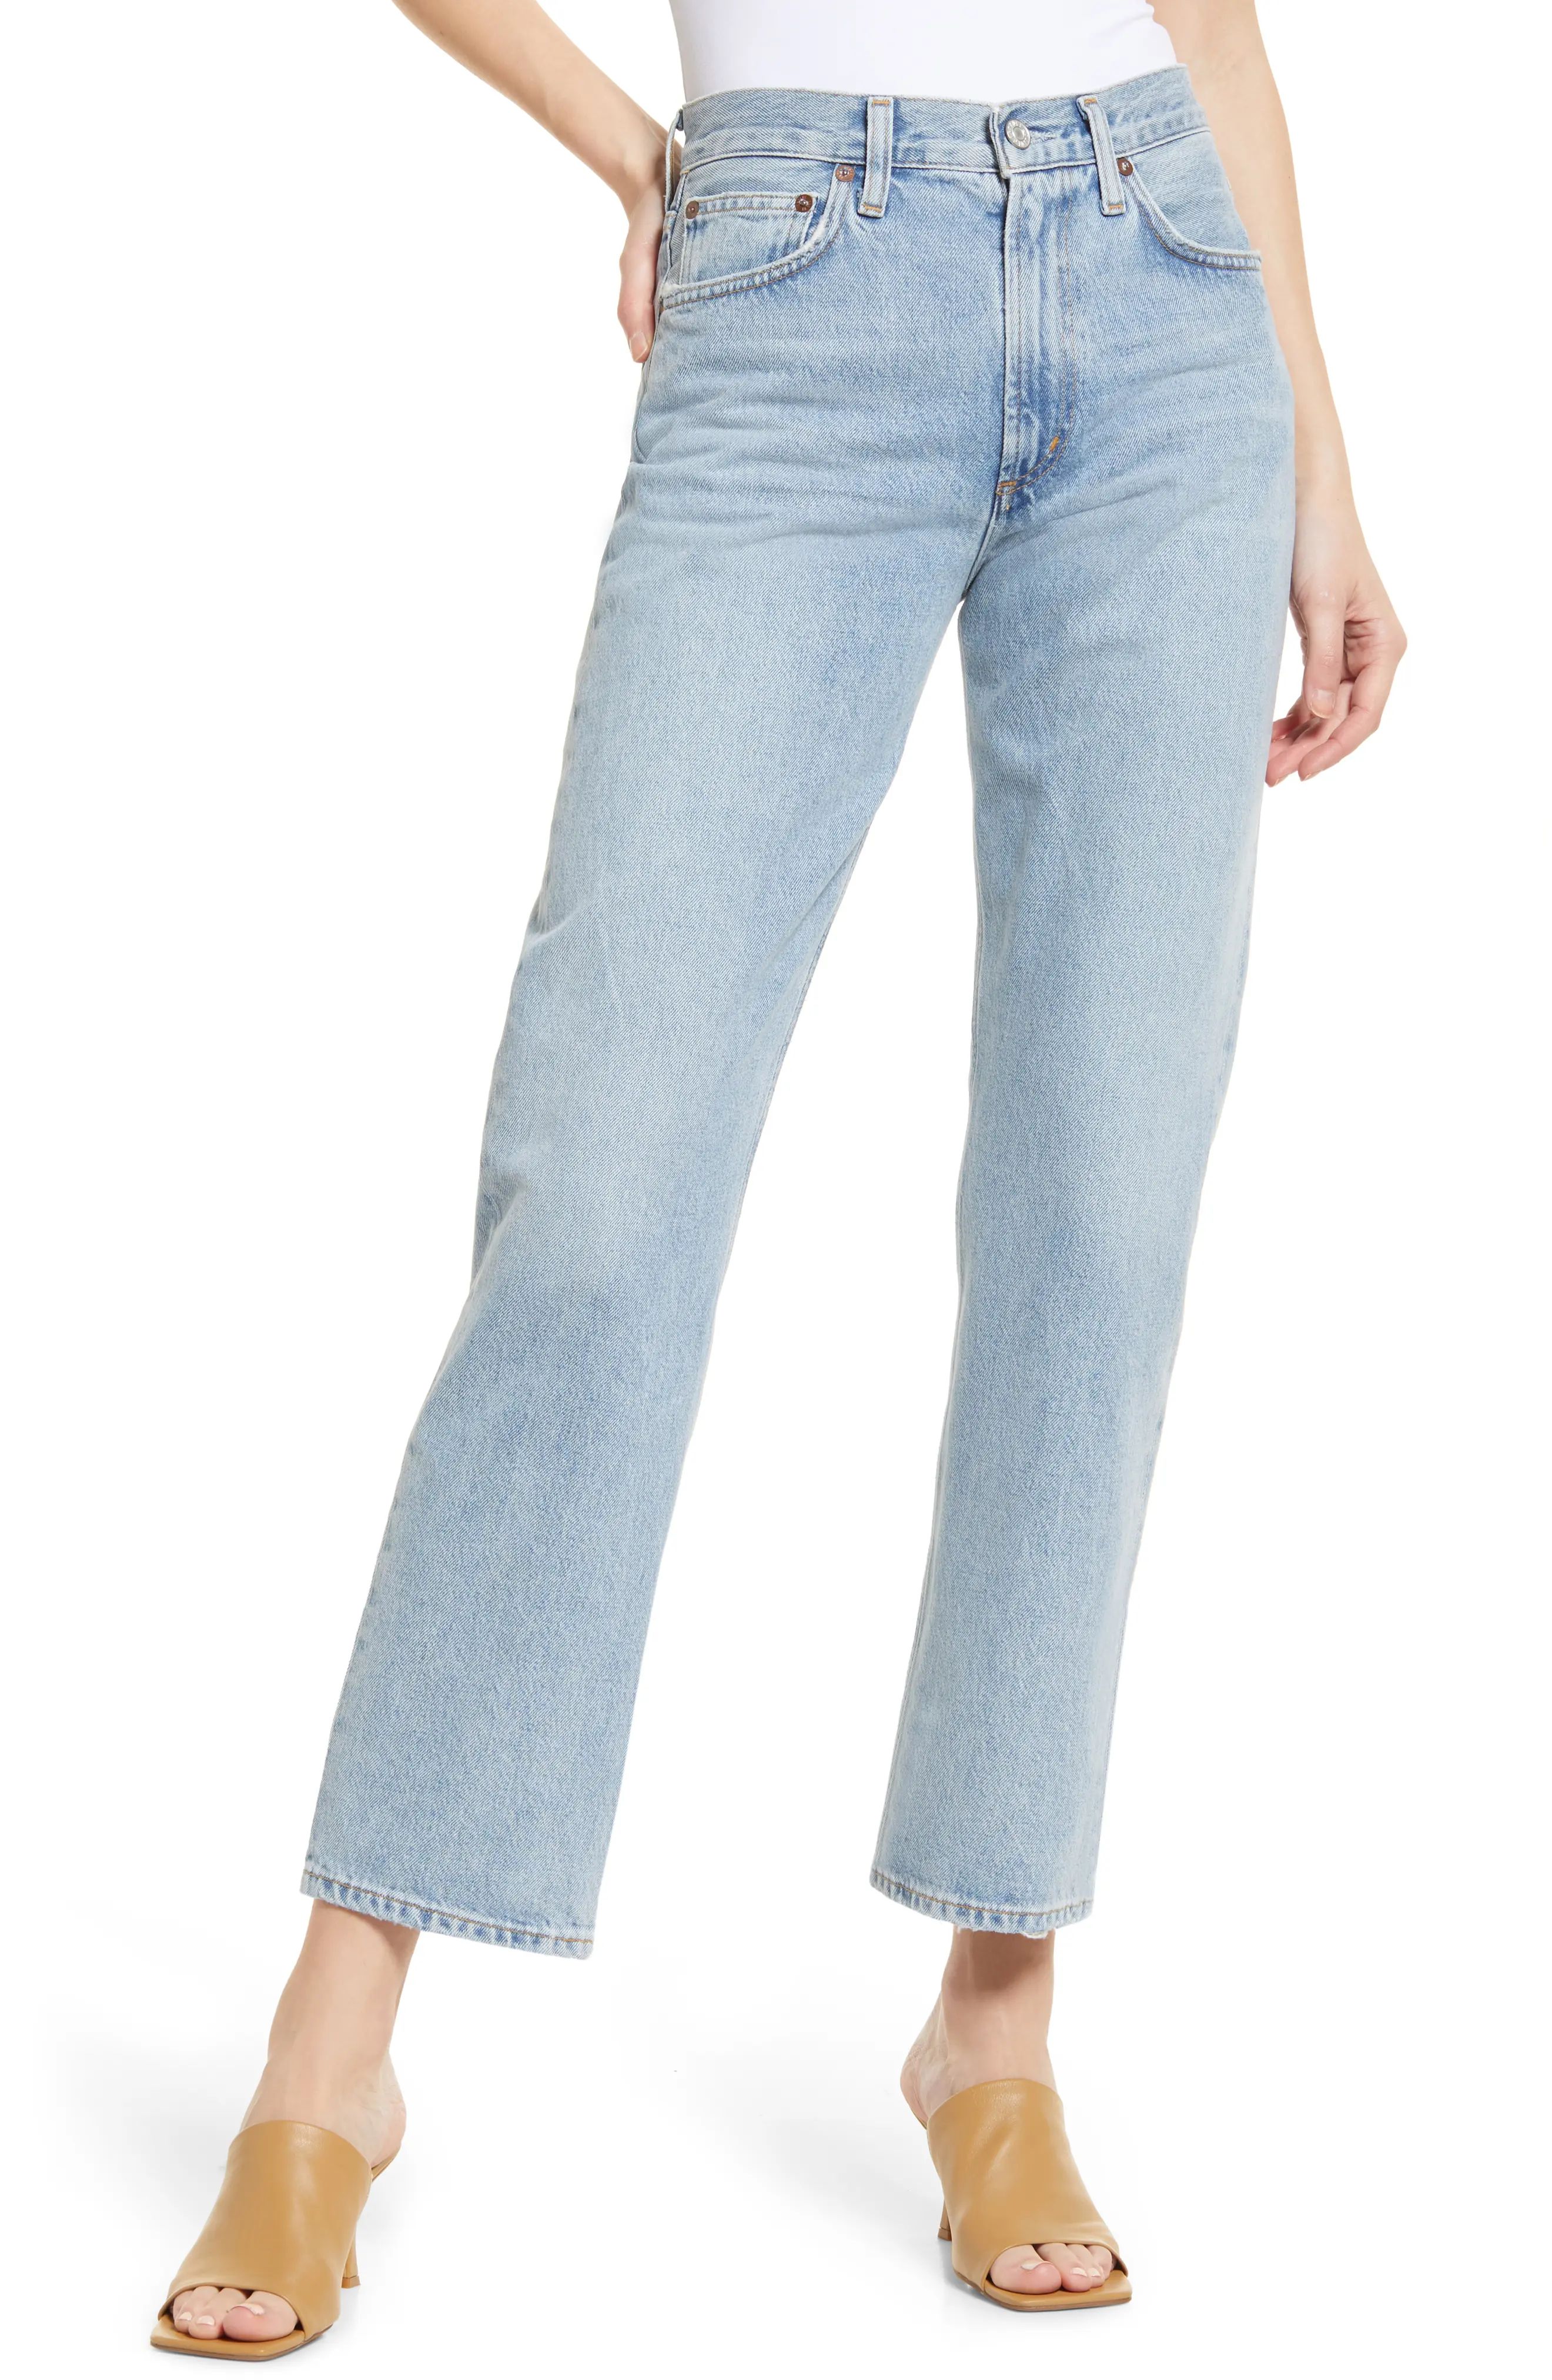 AGOLDE Mia High Waist Straight Leg Organic Cotton Jeans in Dimension at Nordstrom, Size 25 | Nordstrom